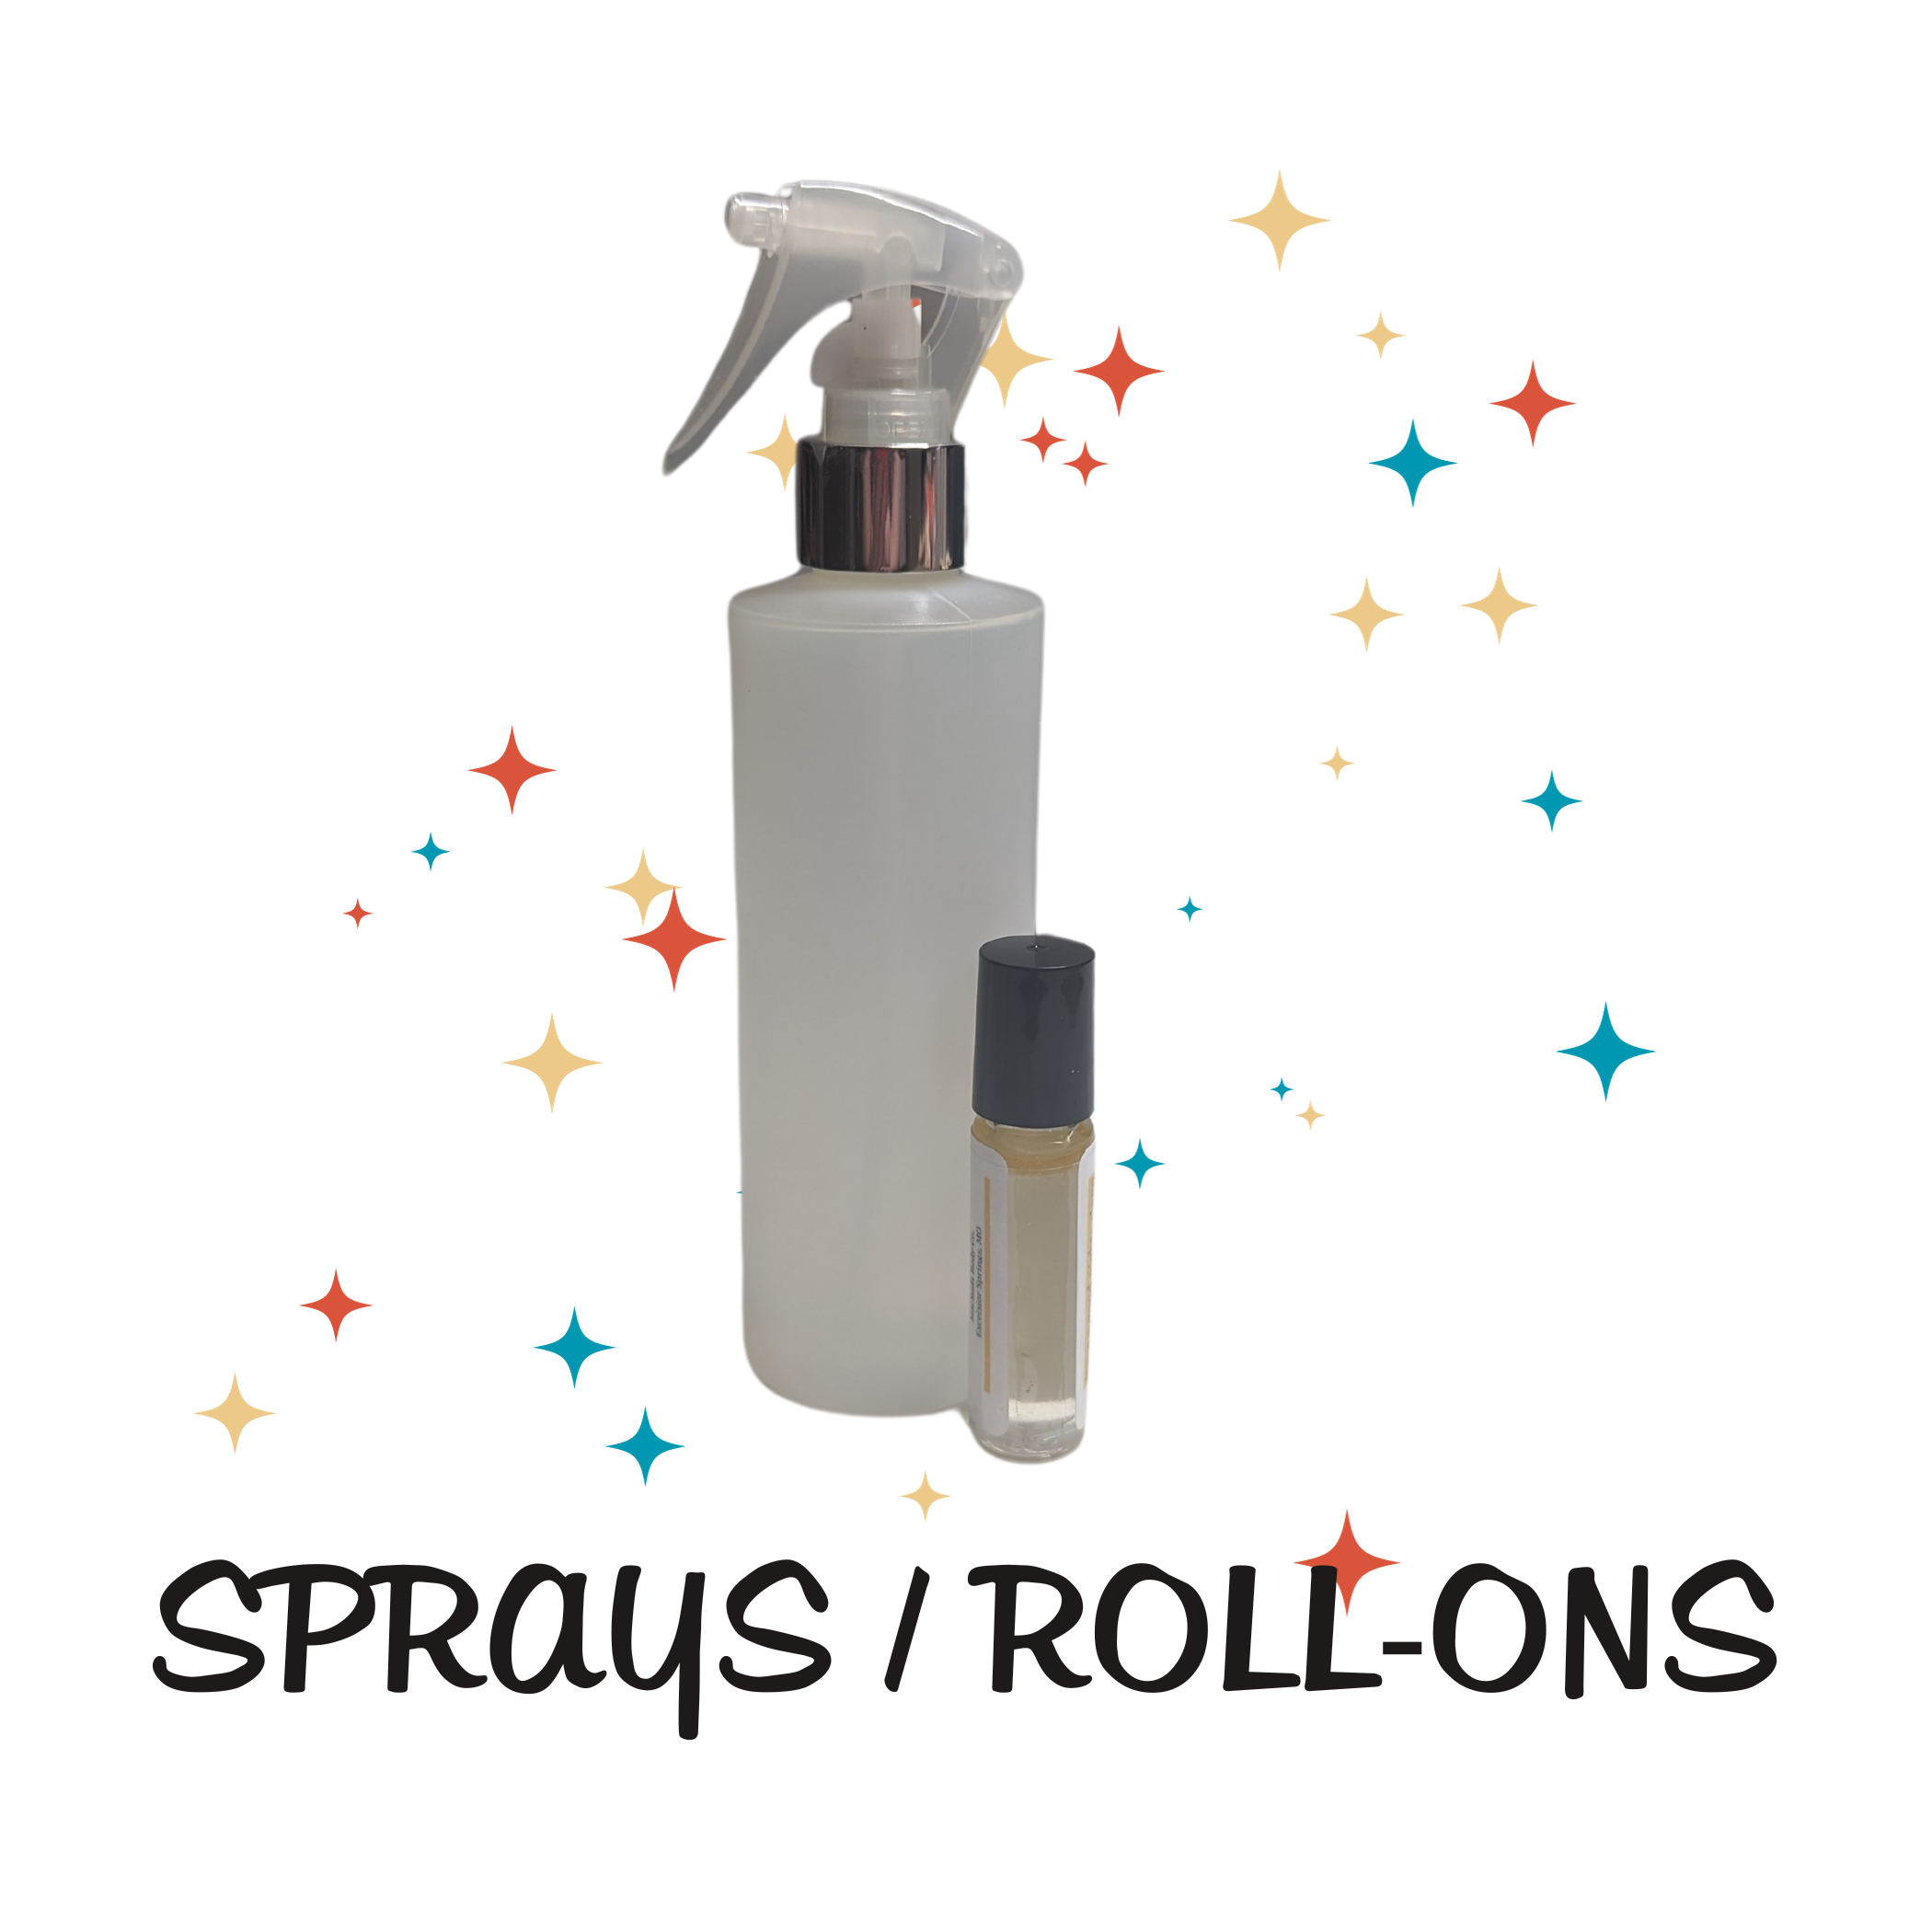 Natural Bug Spray and Roll Ons by MacSuds Body